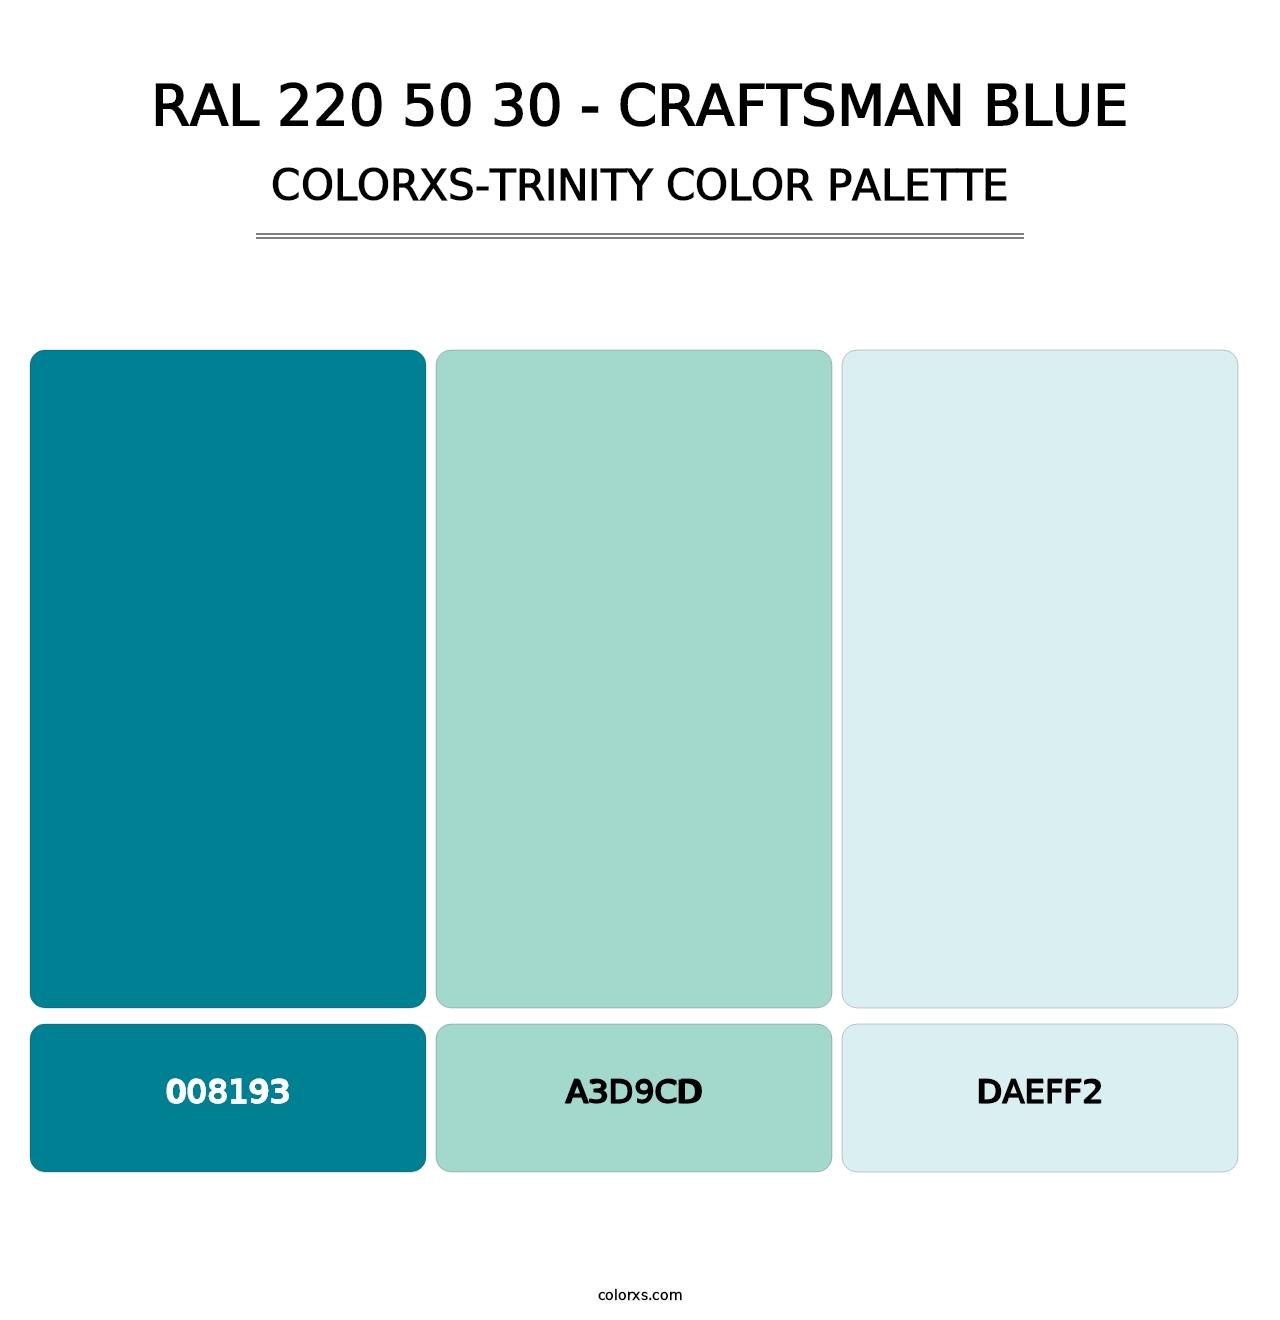 RAL 220 50 30 - Craftsman Blue - Colorxs Trinity Palette